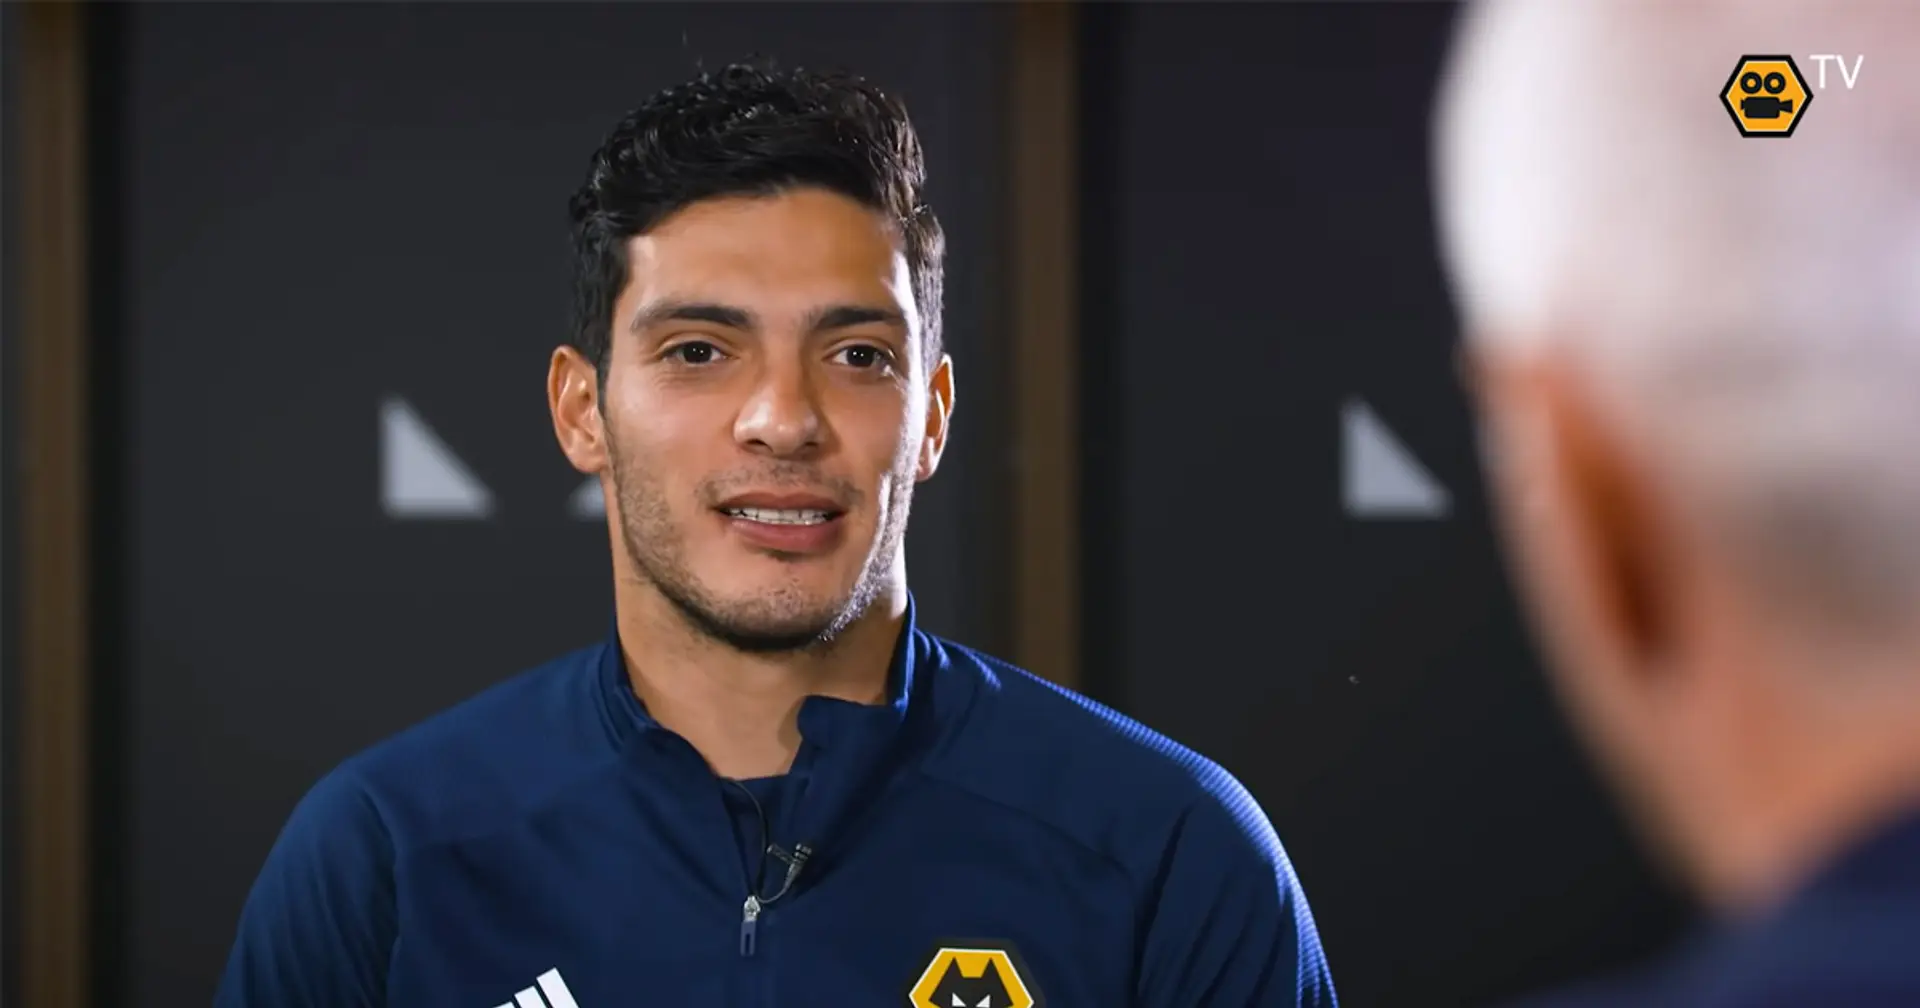 'The truth is I am very happy at Wolves': Raul Jimenez reveals he snubbed Man United's approach in the summer